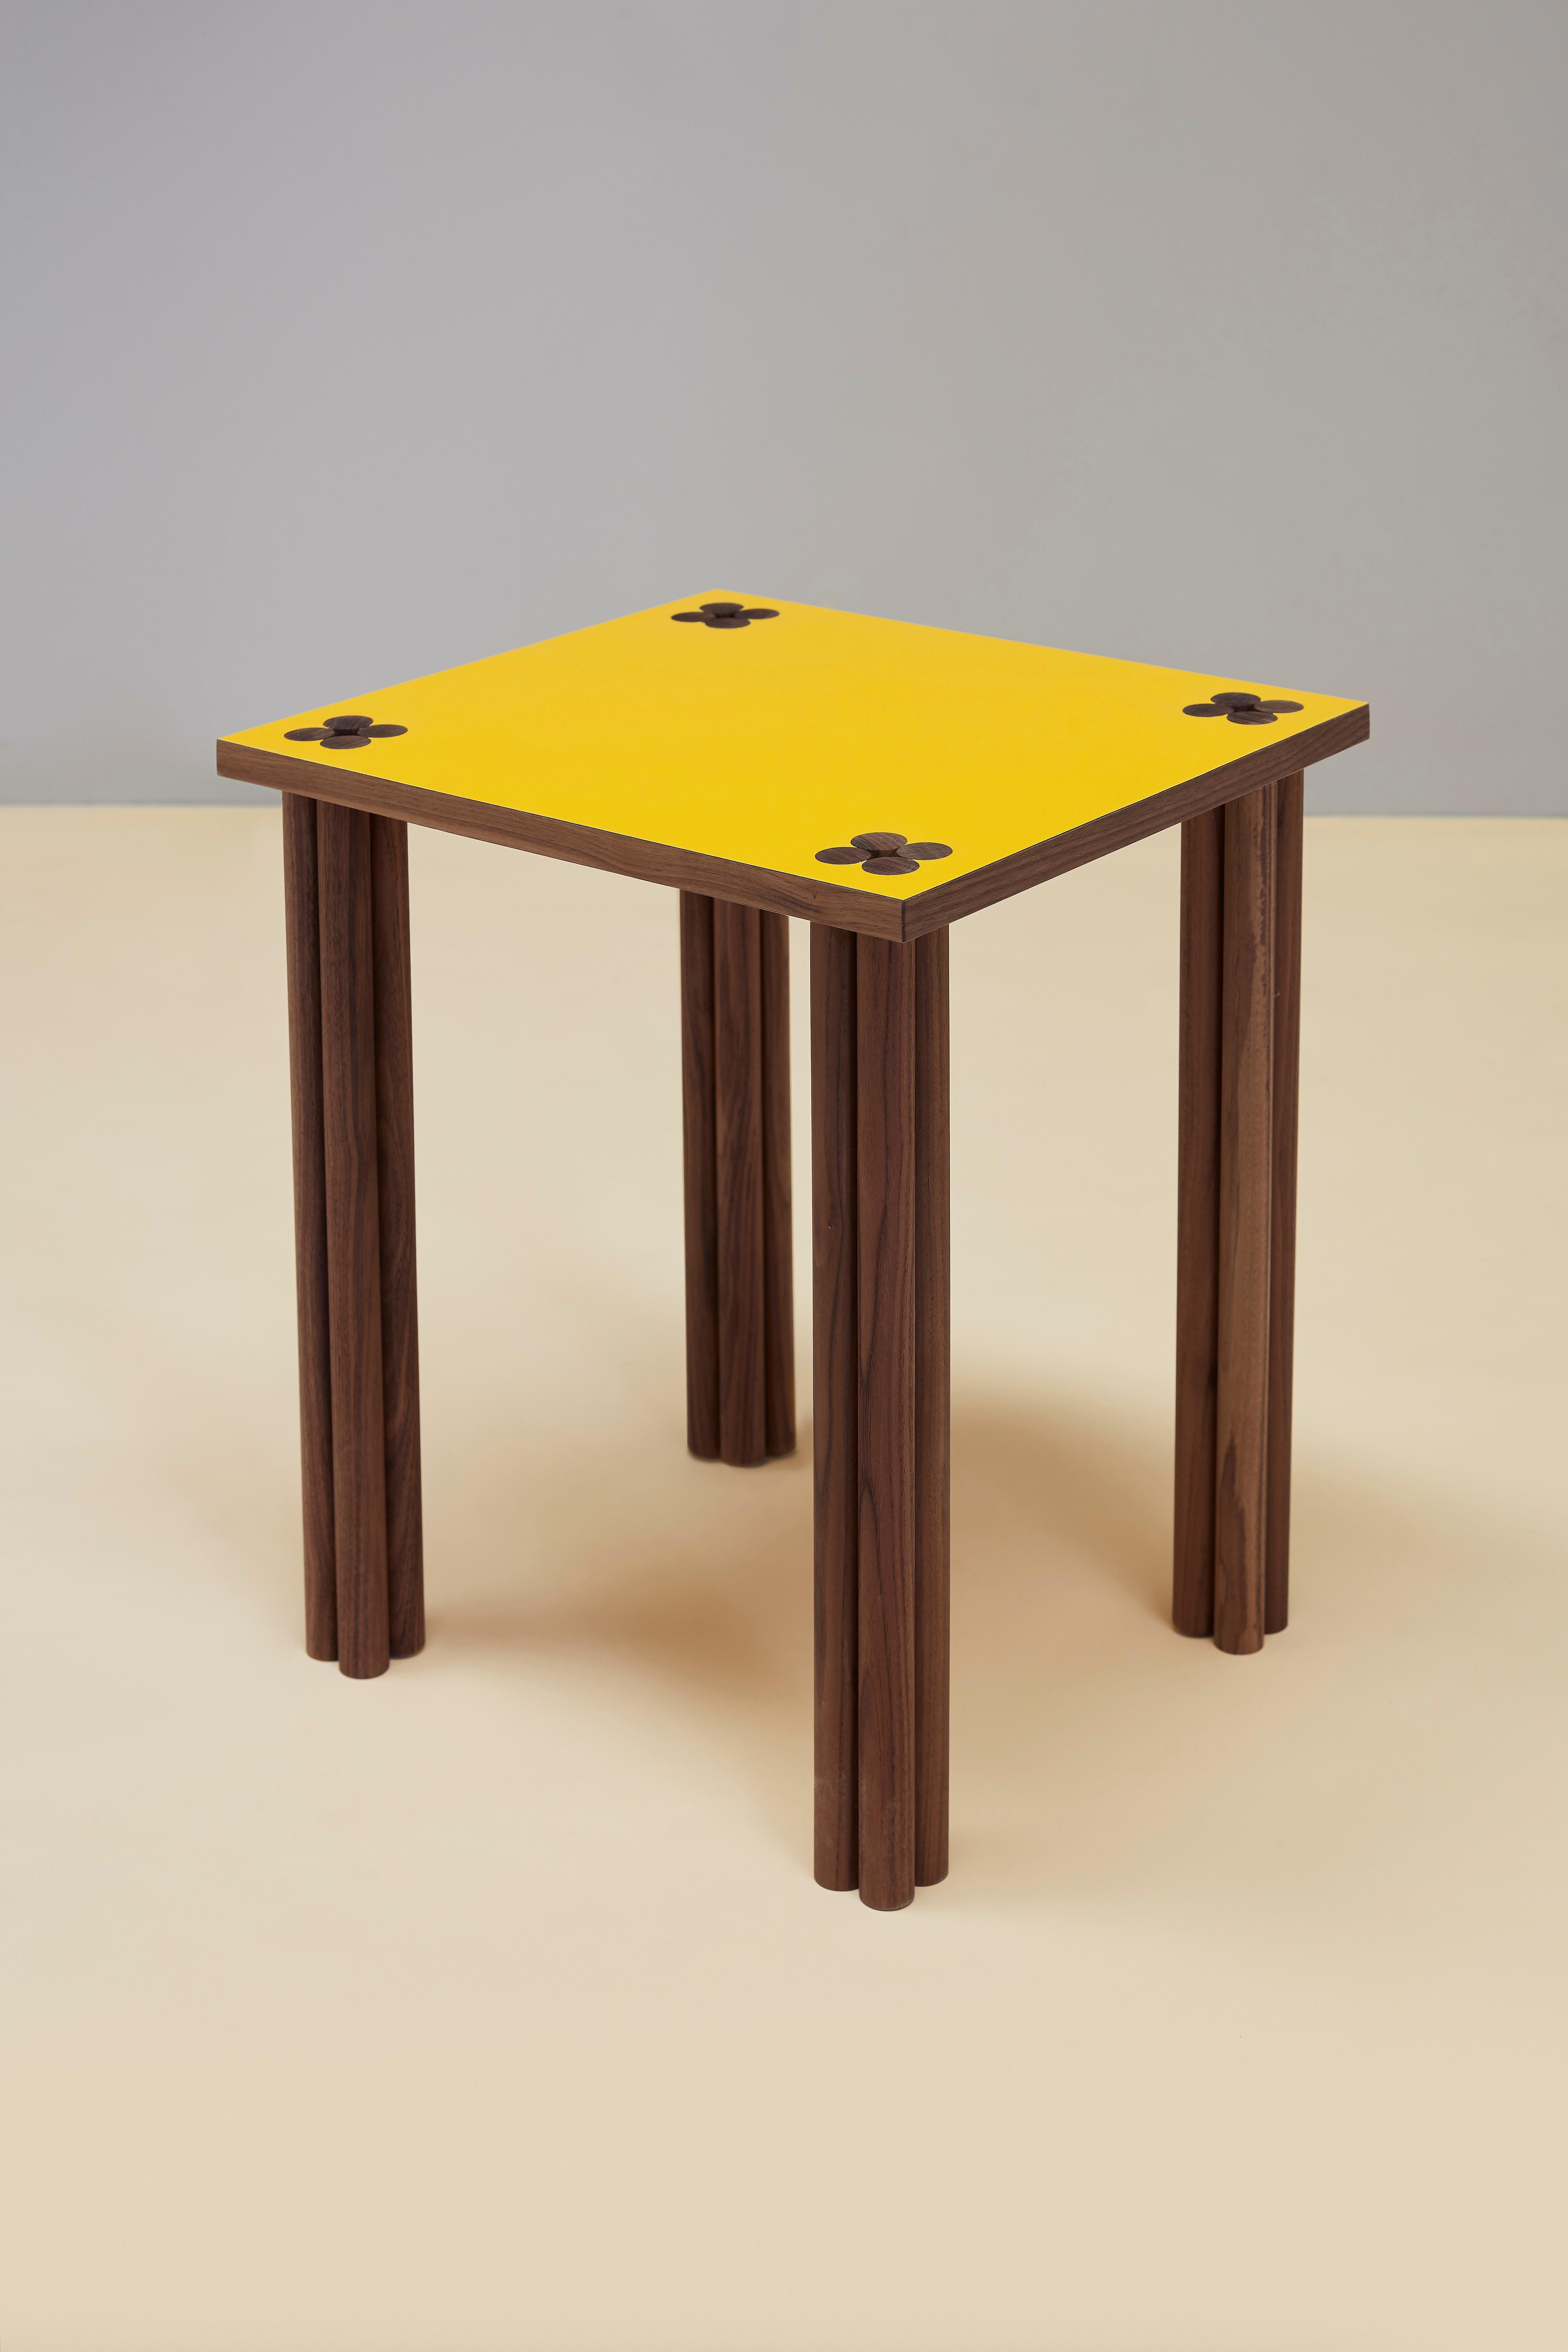 Hana side table by Tino Seubert.
Dimensions: D 43, W 38 x H 50 cm. 
Materials: Solid walnut wood, walnut veneer, Formica.
Oak or other wood possible. 

Tino Seubert
When he first made his now signature wicker and aluminium stools and benches